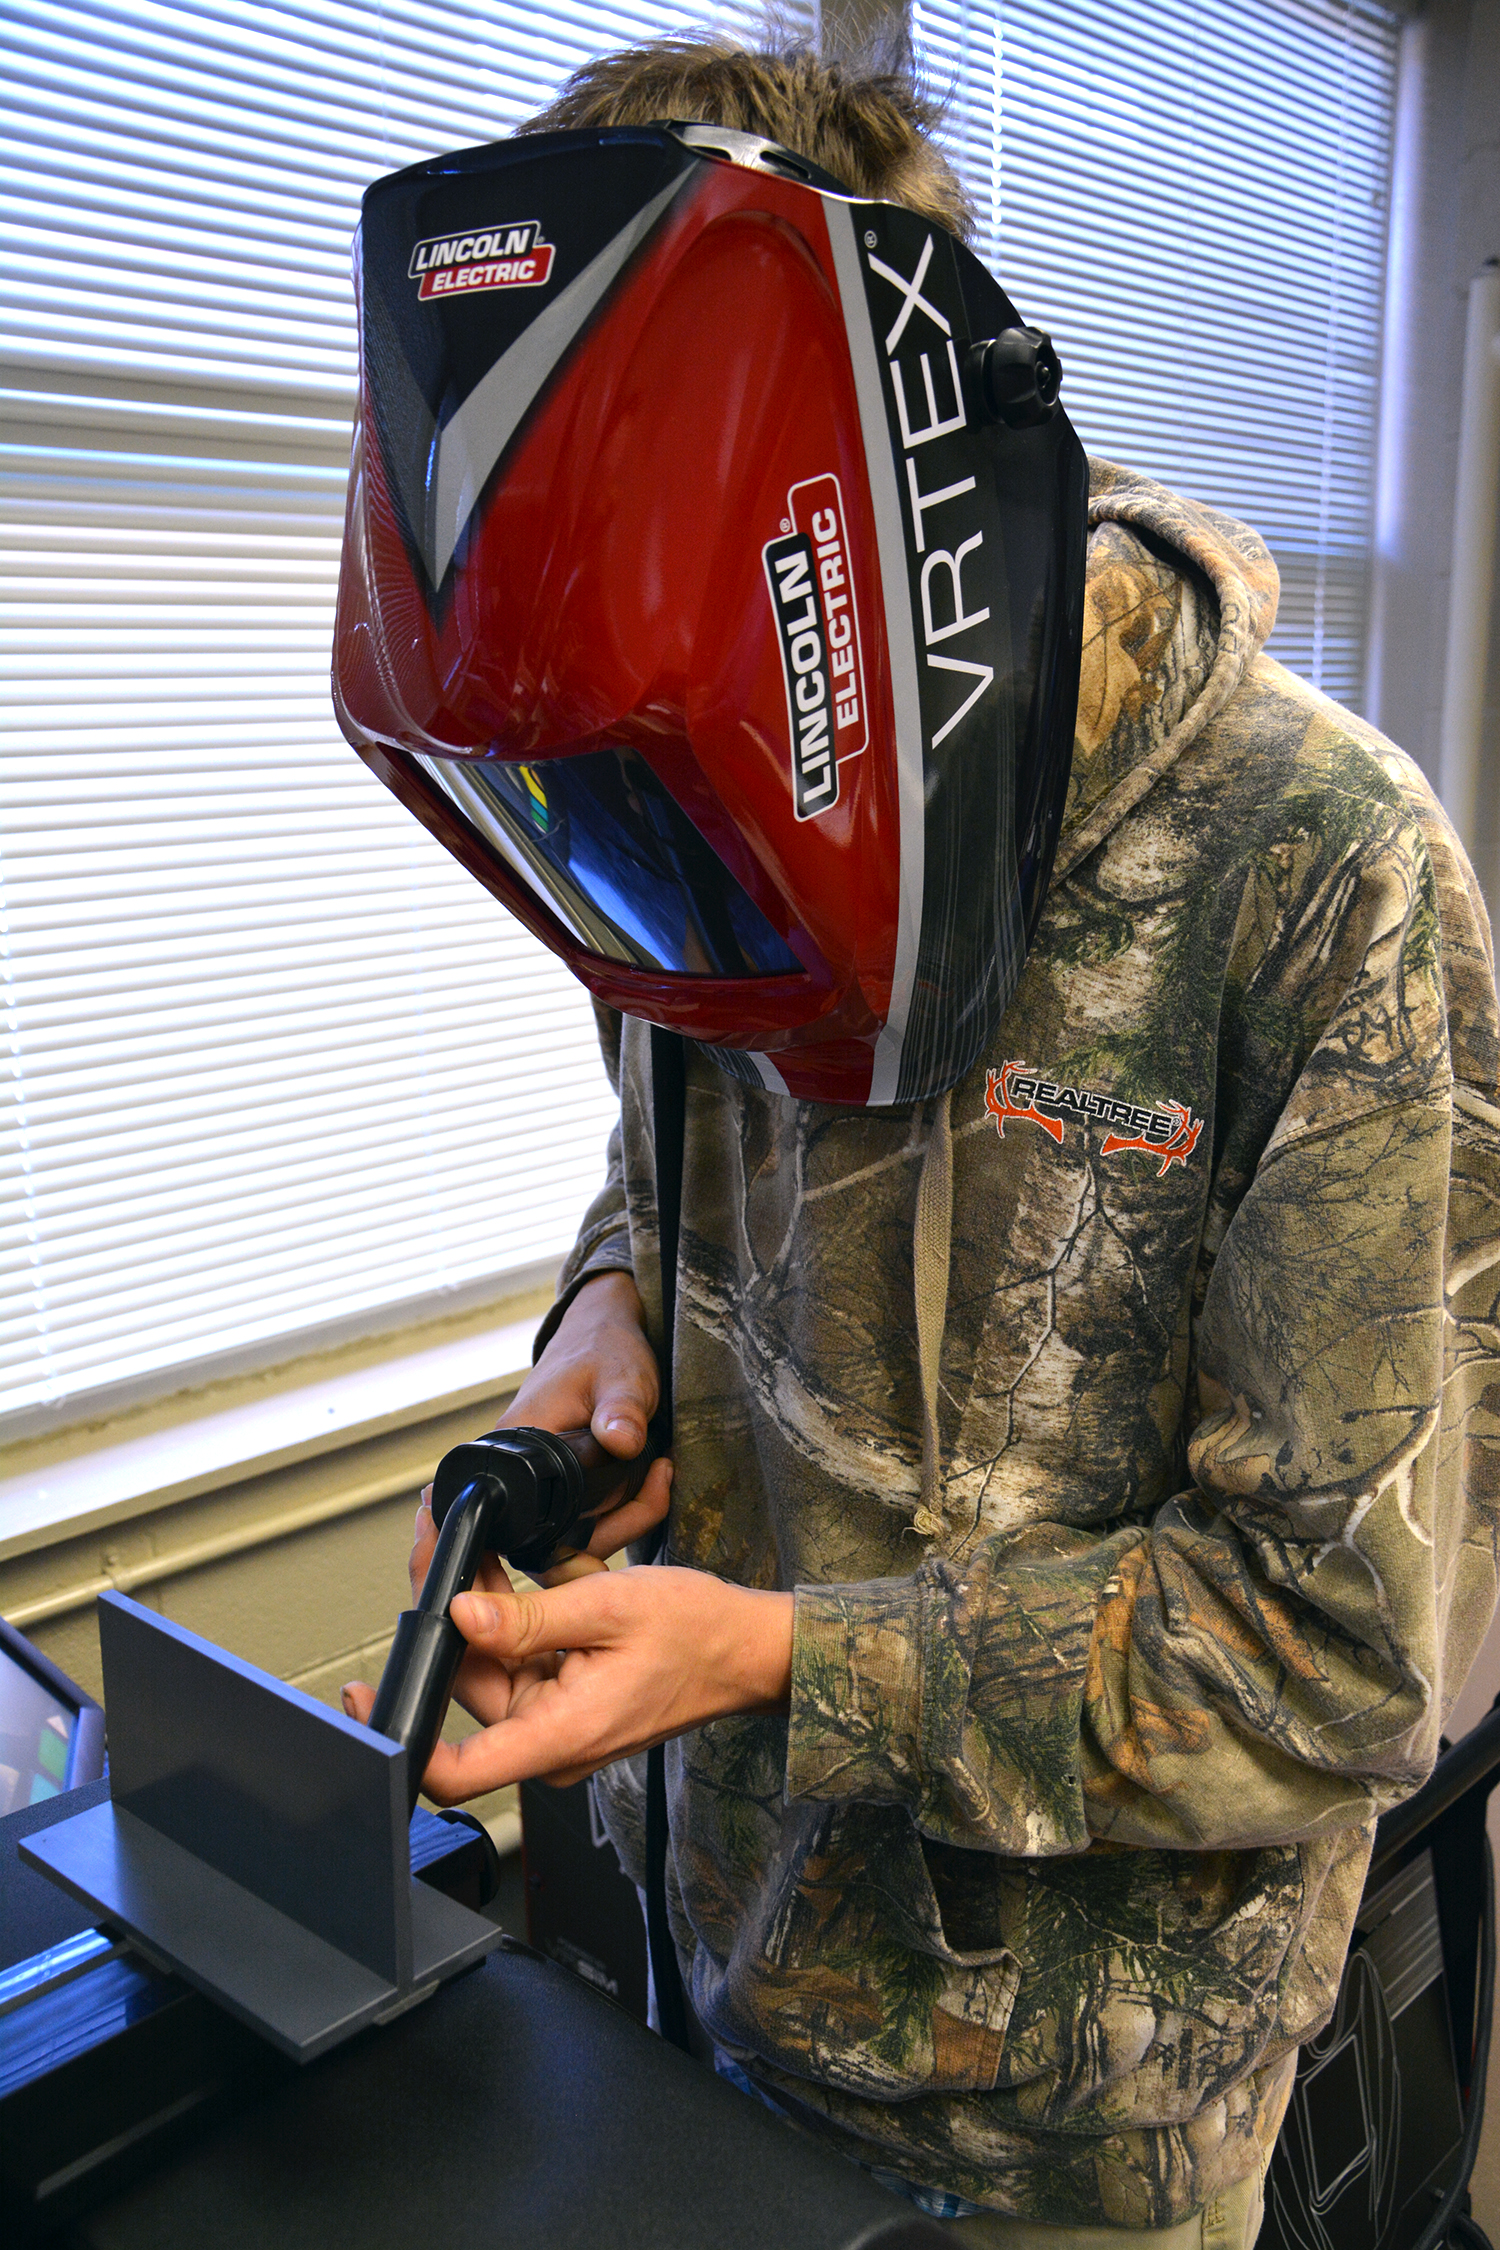 Jeremy Rainwater, a senior in the welding class offered through Richmond Community College at Ashley Chapel Educational Center, hones his cutting skills using a virtual welding machine.